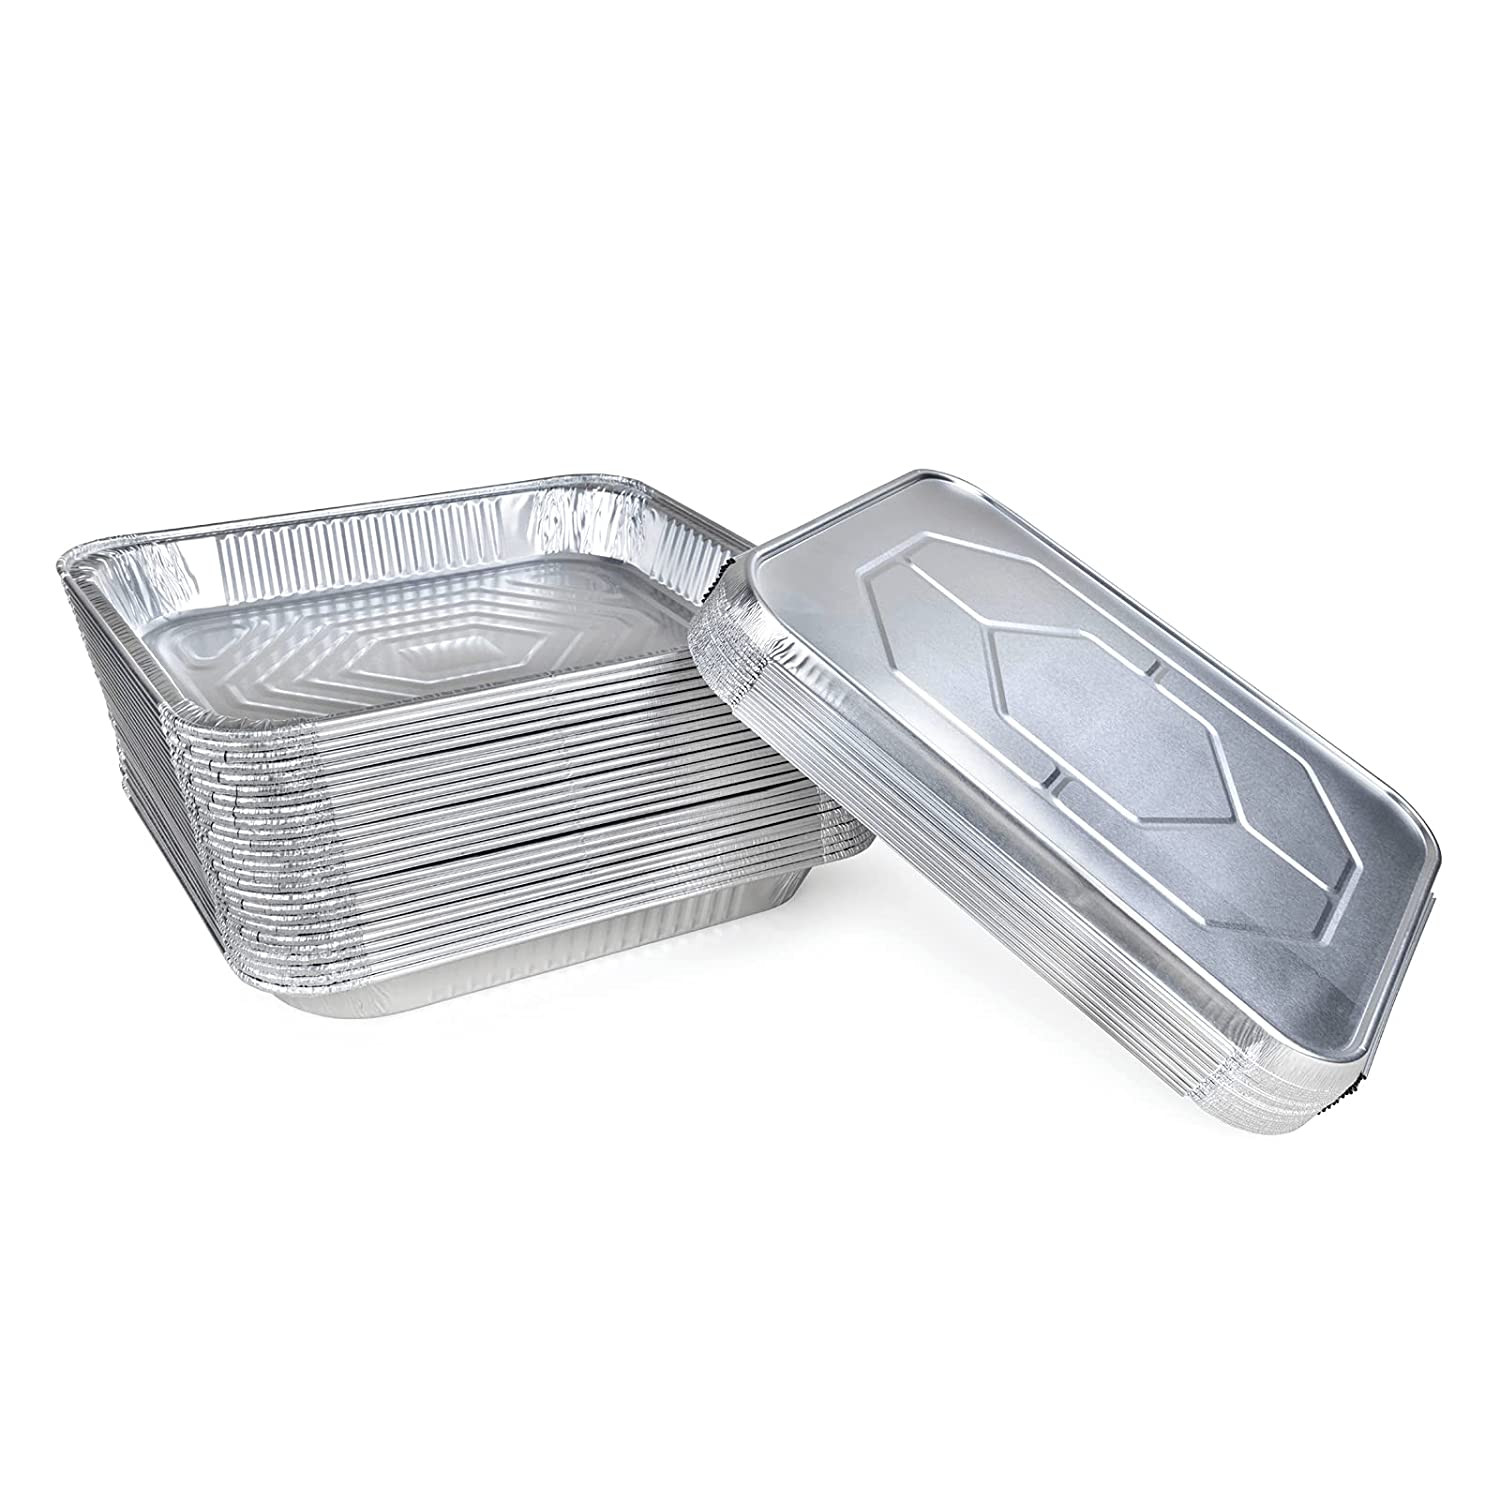 Heavy Duty Full Size Shallow Aluminum Pans Foil Roasting & Steam Table Pan  21x13 inch - Shallow Pan Chafing Trays for Catering - Disposable Large Pans